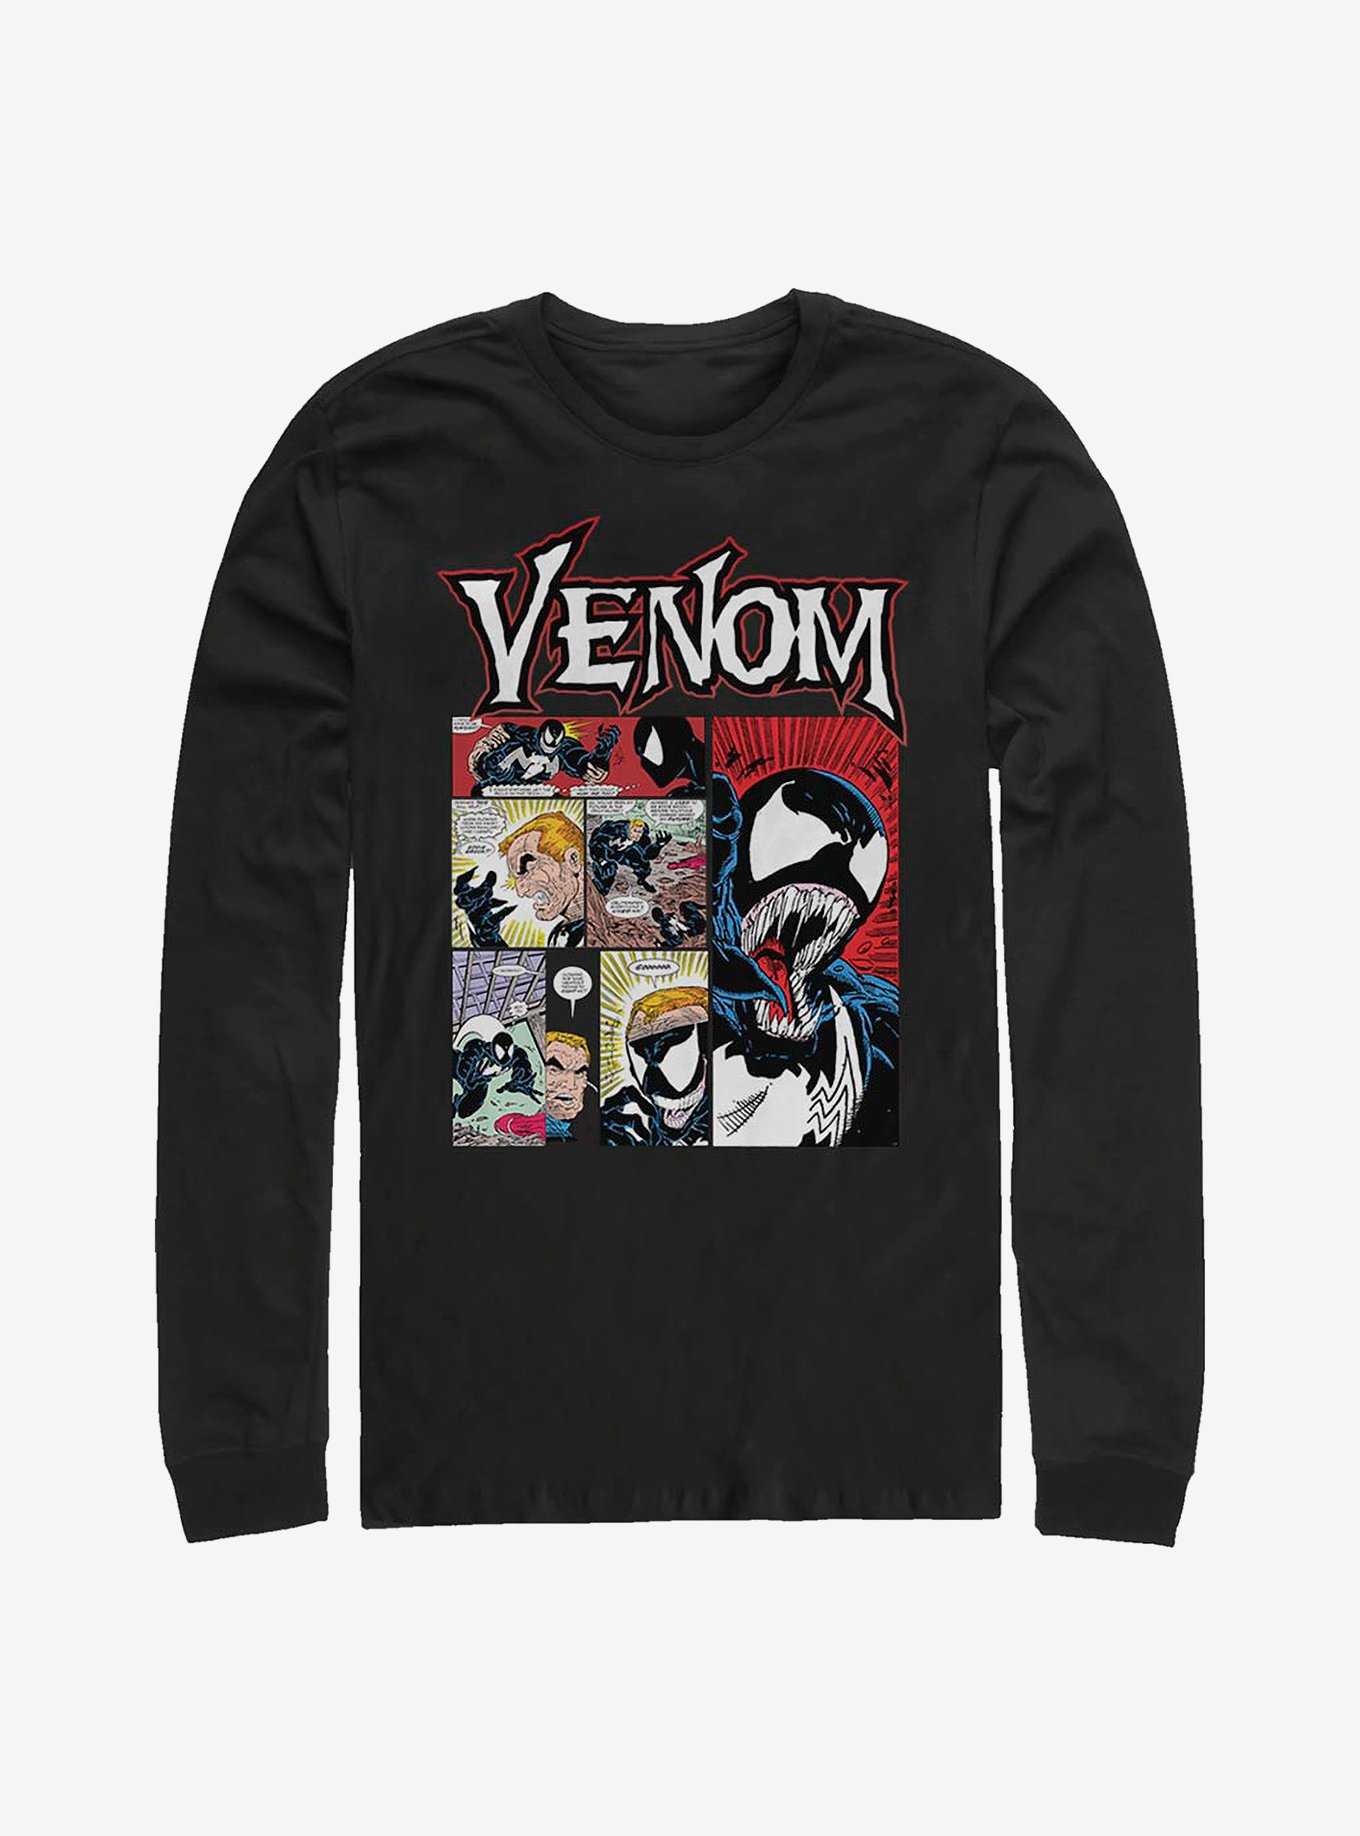 Marvel Venom: Let There Be Carnage Whom The Bell Tolls Long-Sleeve T-Shirt, , hi-res